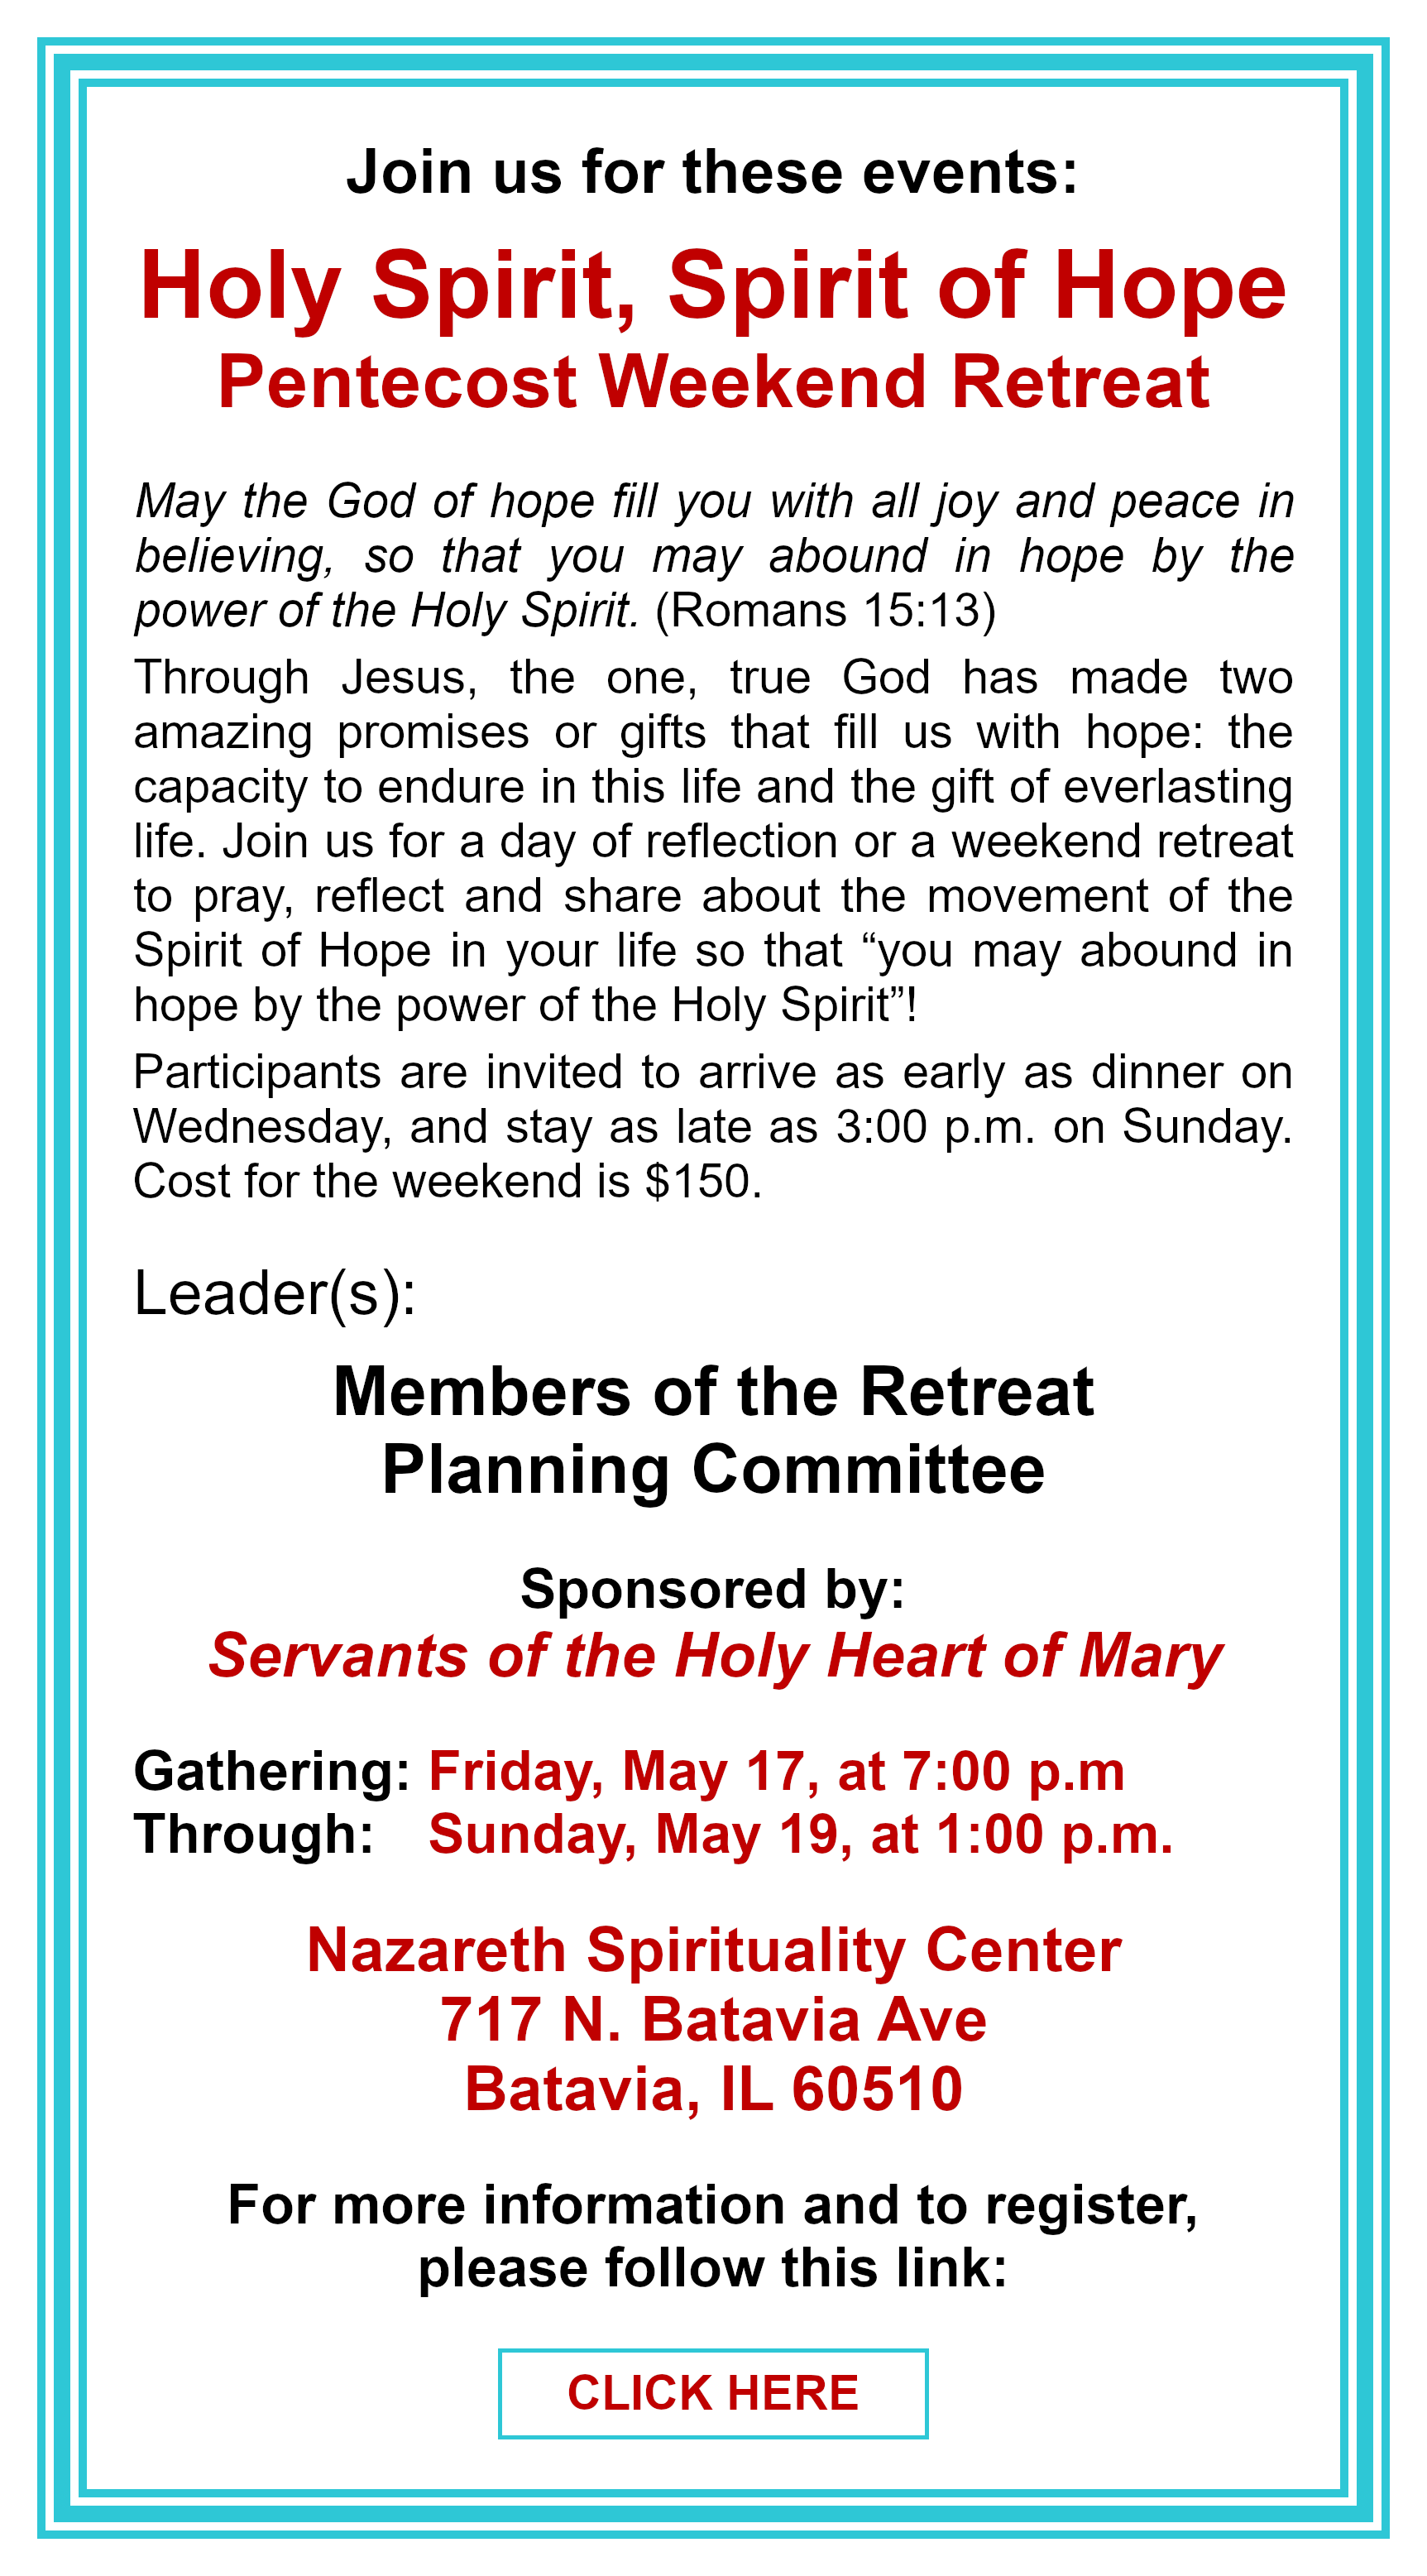 Holy Spirit, Spirit of Hope Pentecost Weekend Retreat: Click here for more information